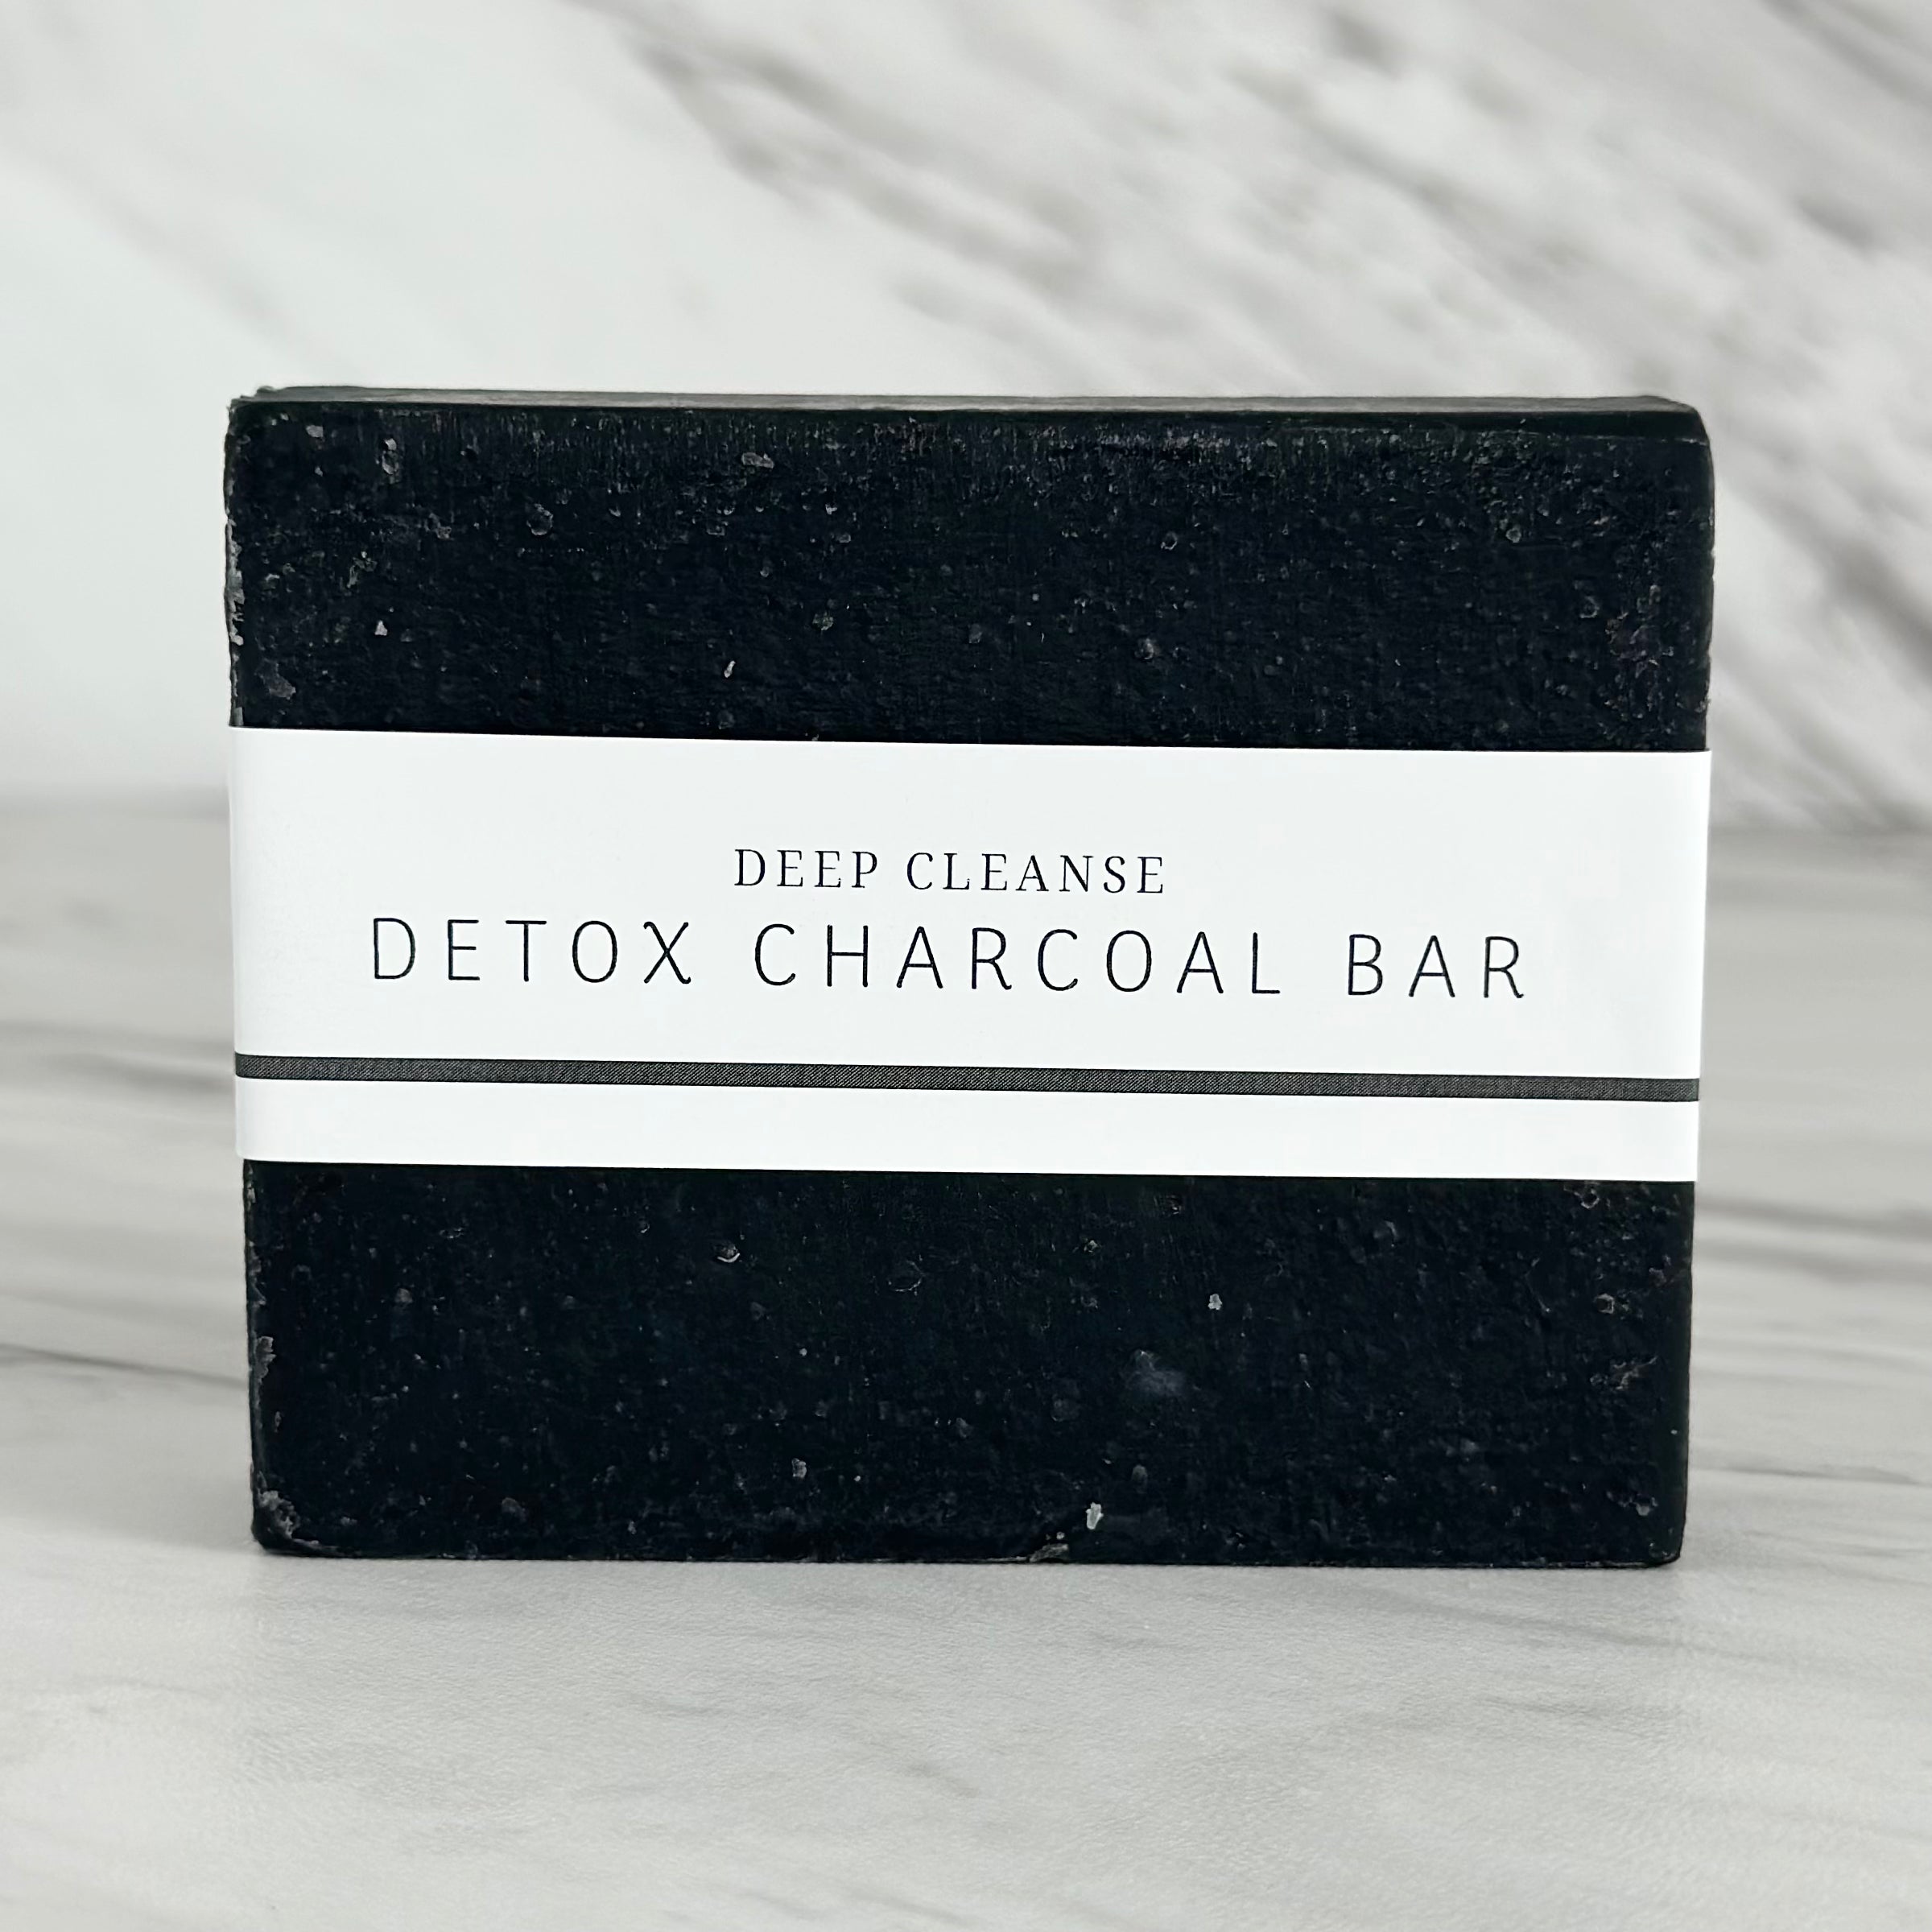 Activated Charcoal Face + Body Bar